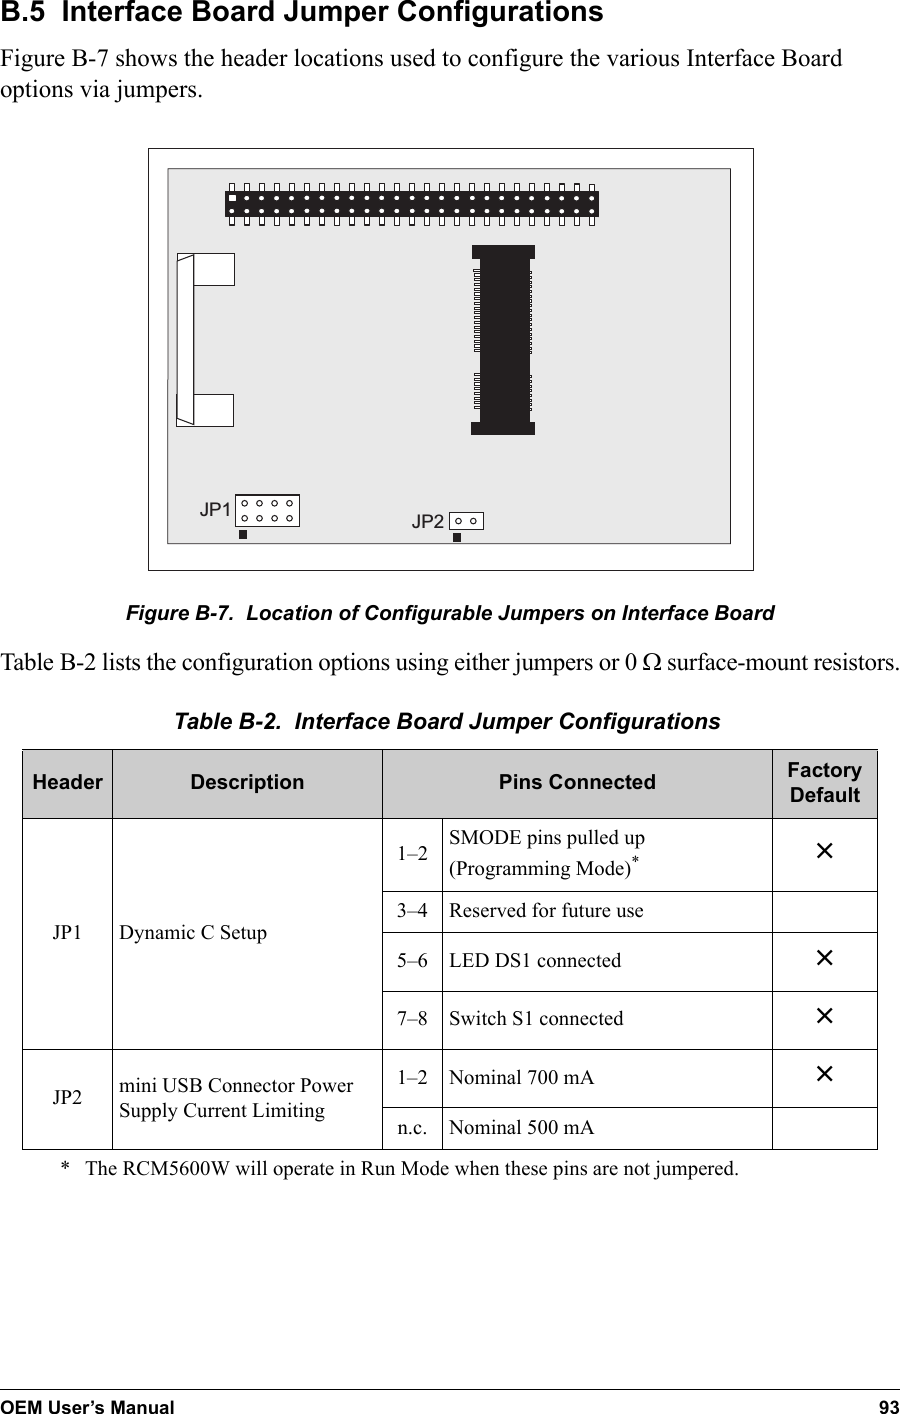 OEM User’s Manual 93B.5  Interface Board Jumper ConfigurationsFigure B-7 shows the header locations used to configure the various Interface Board options via jumpers. JP1 JP2Figure B-7.  Location of Configurable Jumpers on Interface BoardTable B-2 lists the configuration options using either jumpers or 0  surface-mount resistors.Table B-2.  Interface Board Jumper Configurations Header Description Pins Connected Factory DefaultJP1 Dynamic C Setup1–2 SMODE pins pulled up(Programming Mode)** The RCM5600W will operate in Run Mode when these pins are not jumpered.×3–4 Reserved for future use5–6 LED DS1 connected ×7–8 Switch S1 connected ×JP2 mini USB Connector Power Supply Current Limiting1–2 Nominal 700 mA ×n.c. Nominal 500 mA